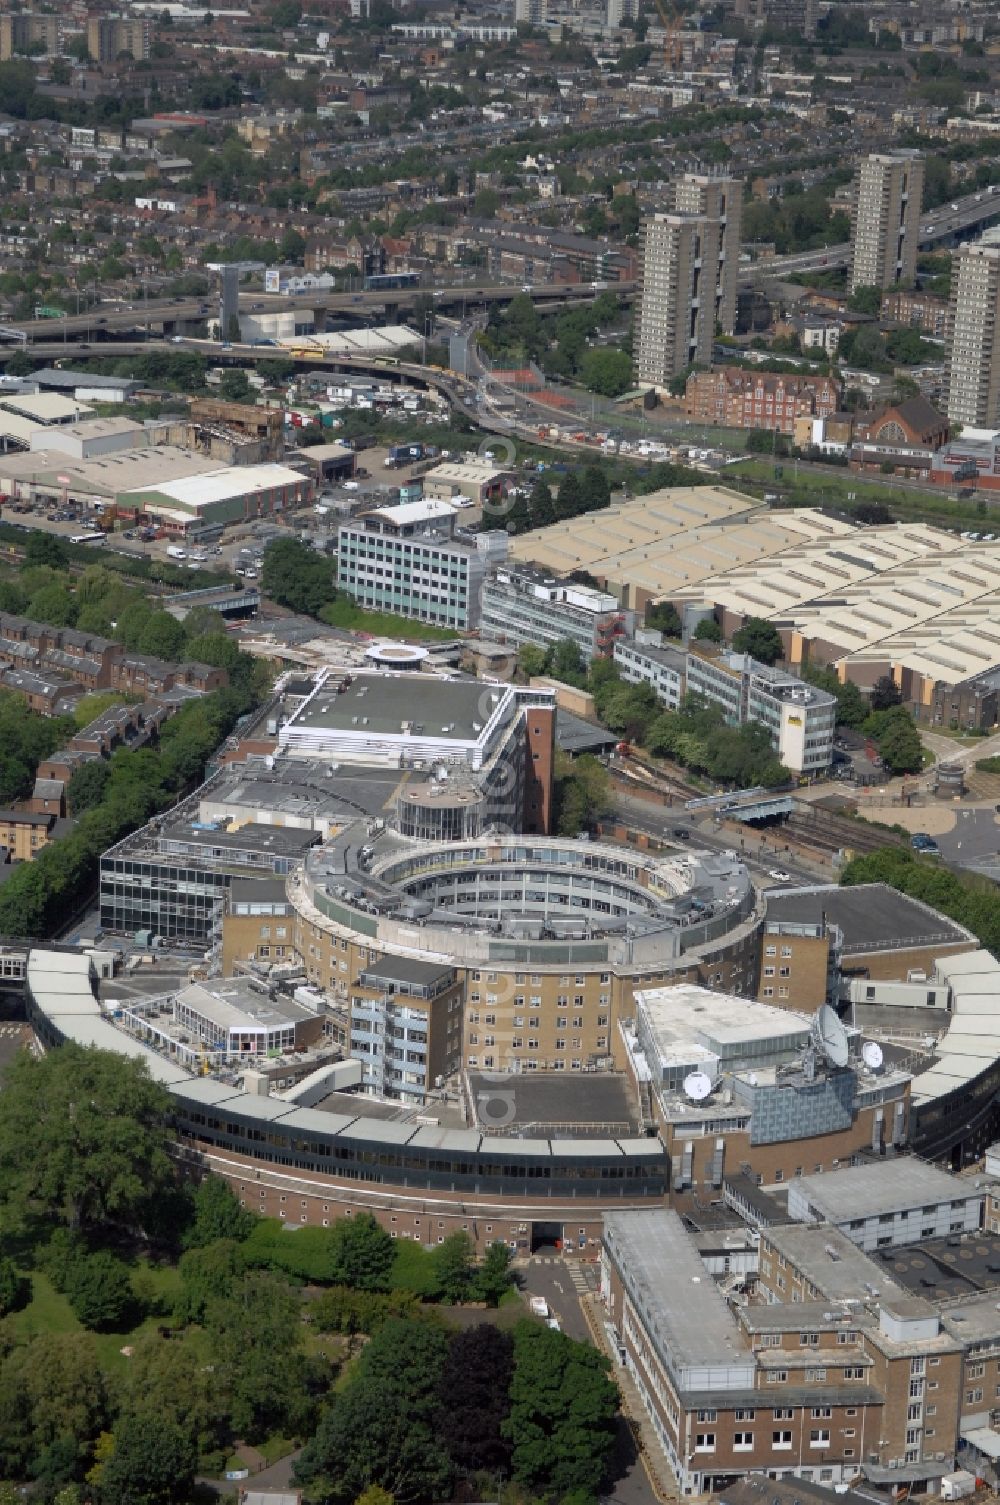 London from the bird's eye view: View of the BBC Televison Centre at White City in West London, the headquarters of the BBC. The building was opened in 1960 and is one of the world's largest buildings, which were designed exclusively for television